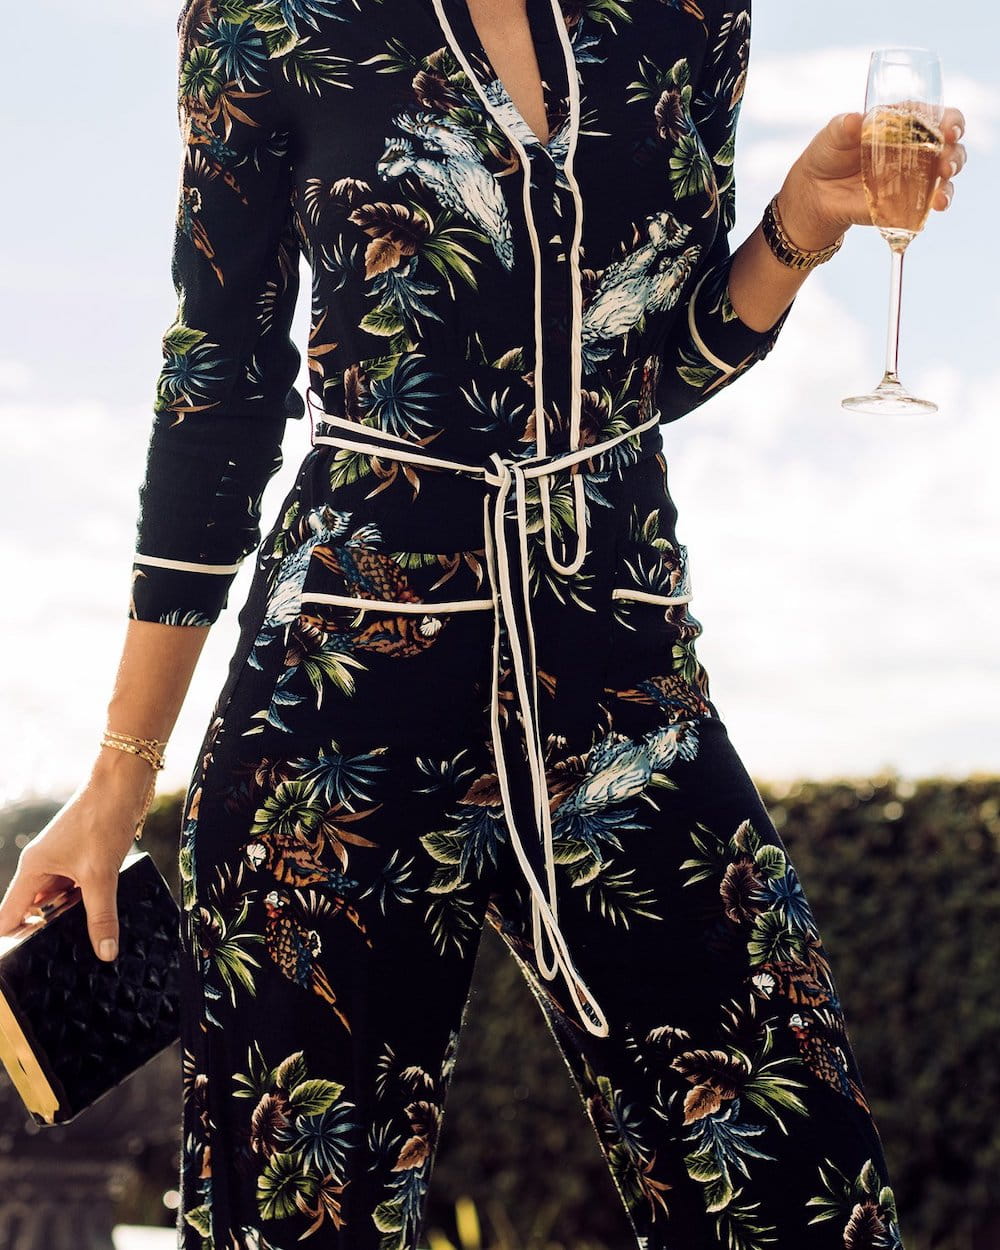 tummy tuck patient model in a floral dress holding a glass of wine and a book